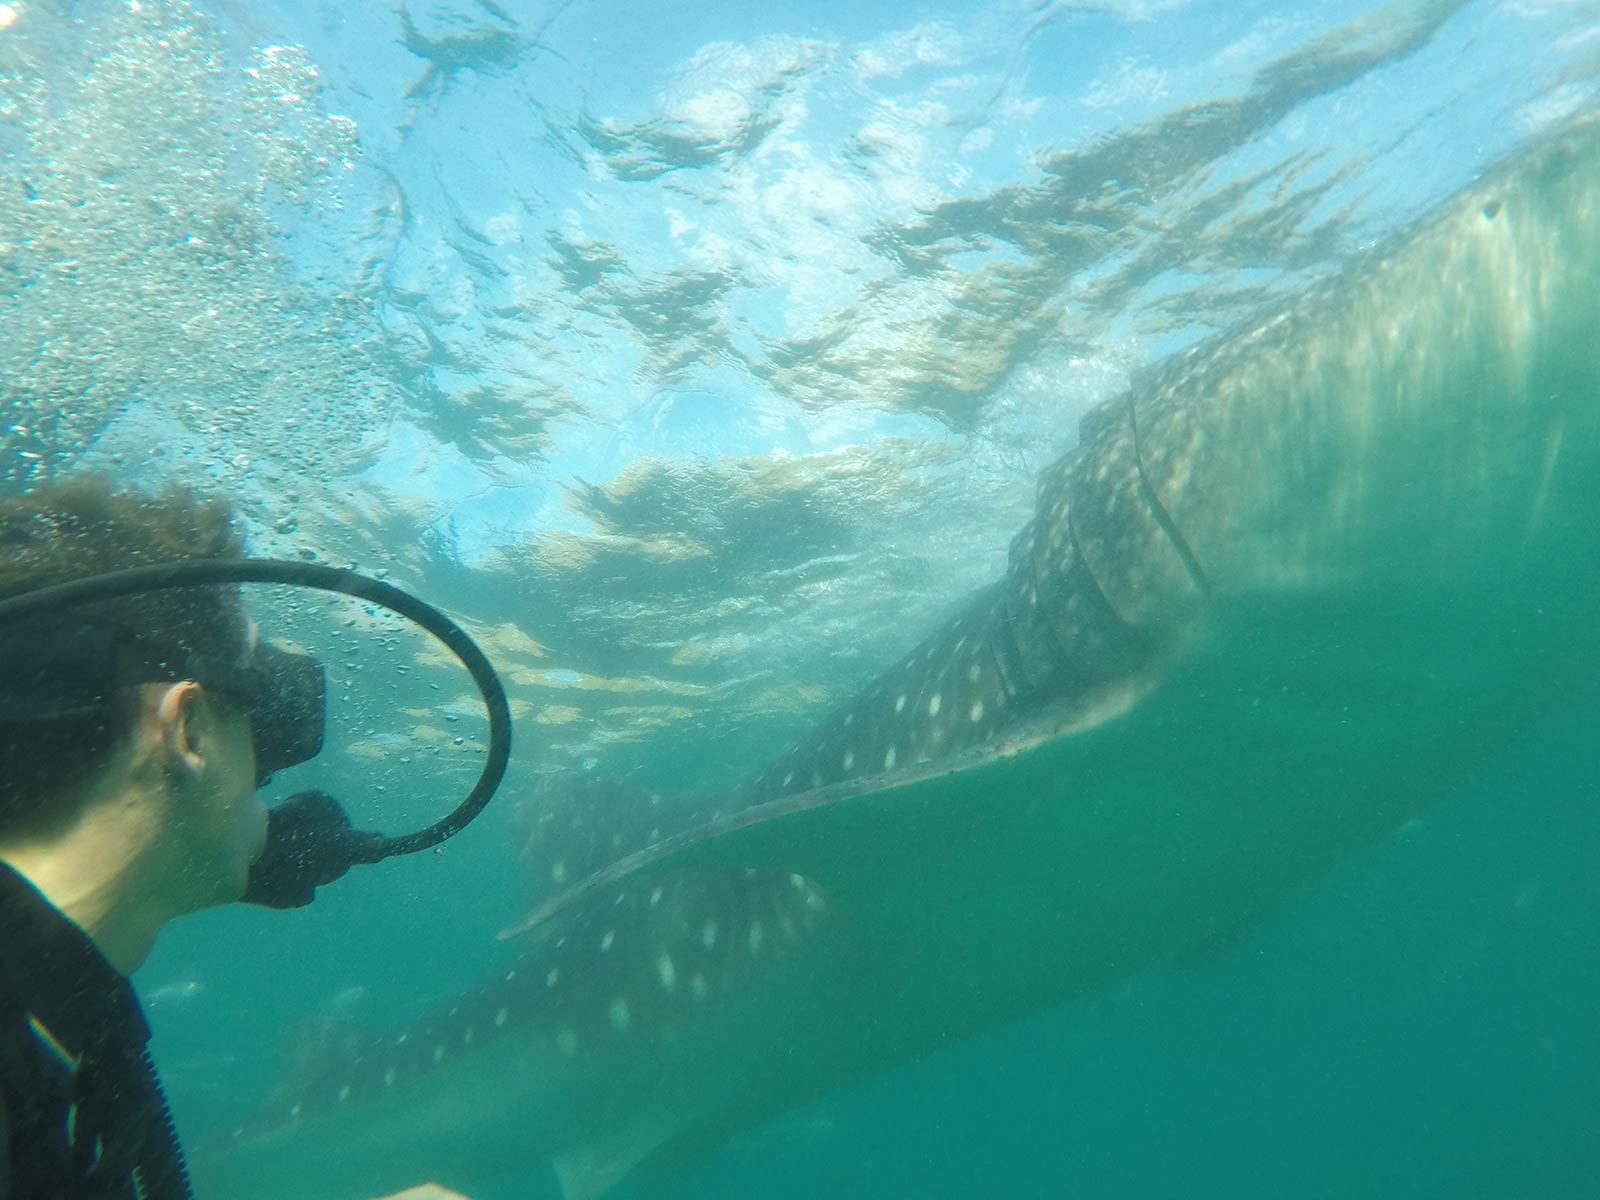 David Simpson swimming with Whale Shark in Oslob, Philippines. Regrettably swimming with Whale Sharks